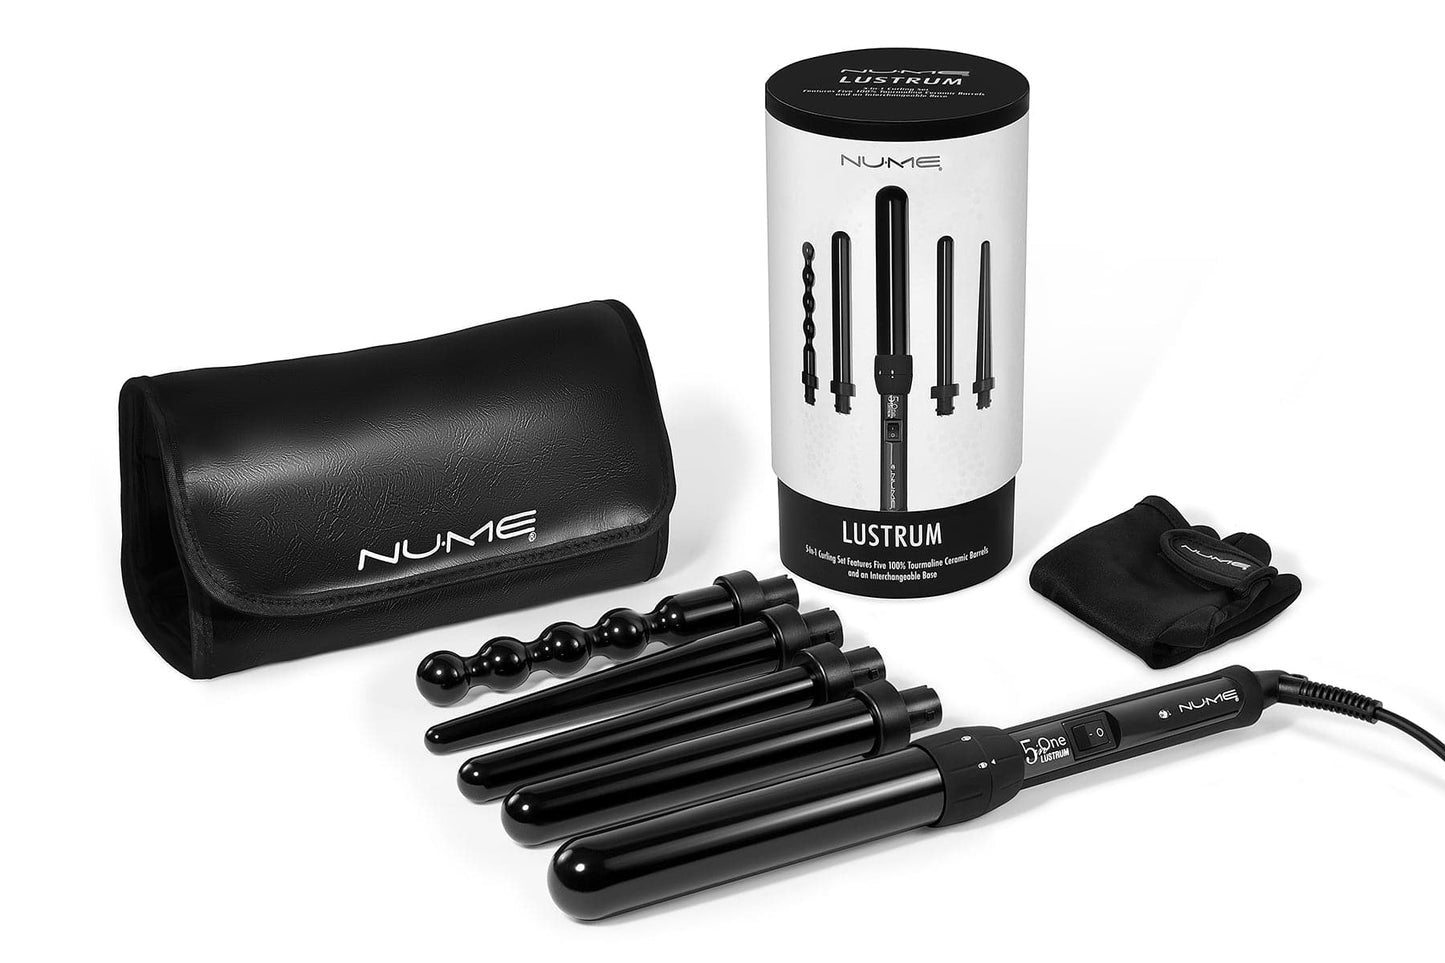 Lustrum 5-in-1 Curling Wand